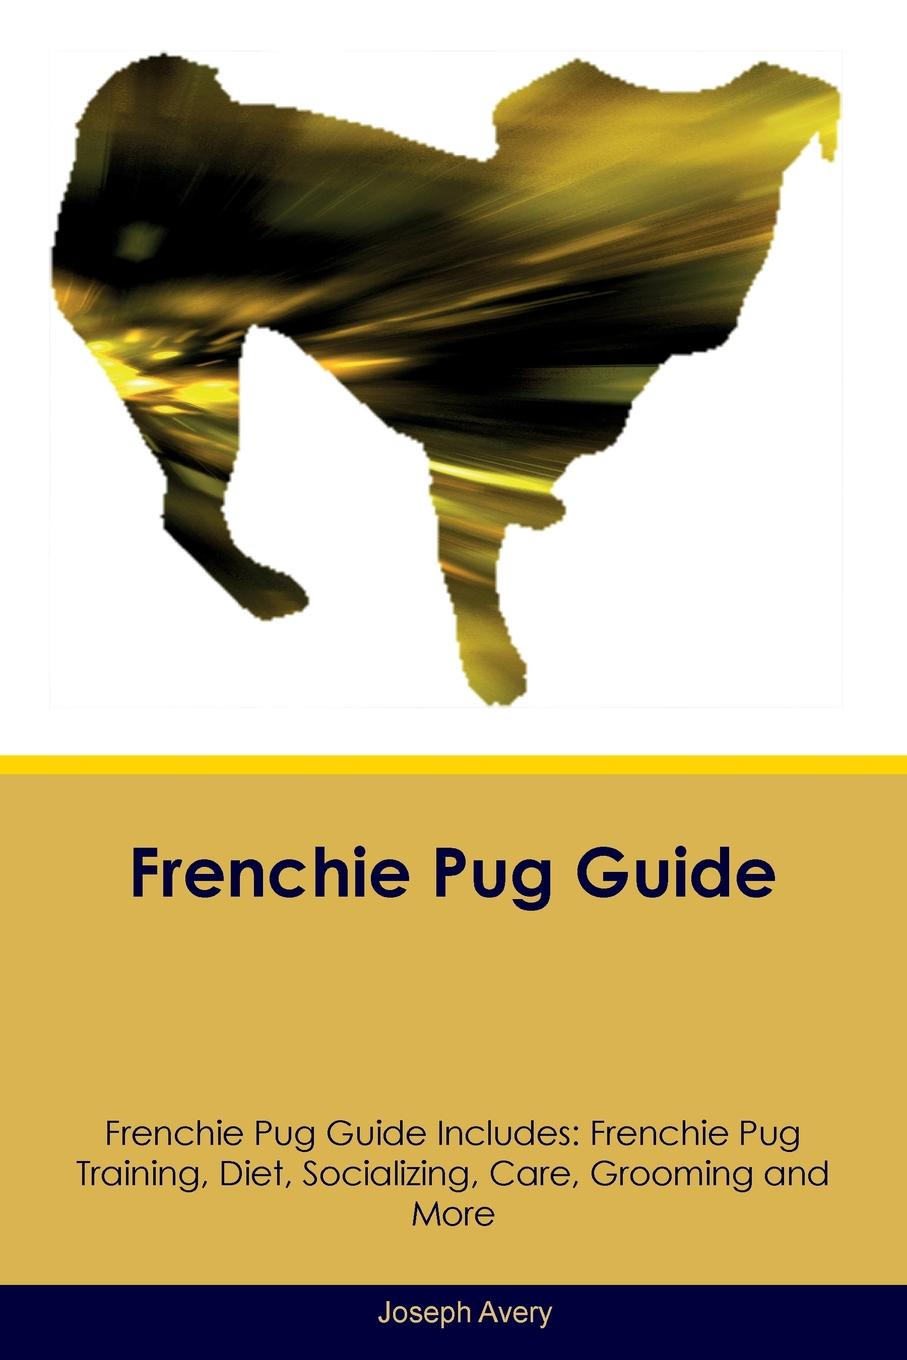 Frenchie Pug Guide Frenchie Pug Guide Includes. Frenchie Pug Training, Diet, Socializing, Care, Grooming, Breeding and More